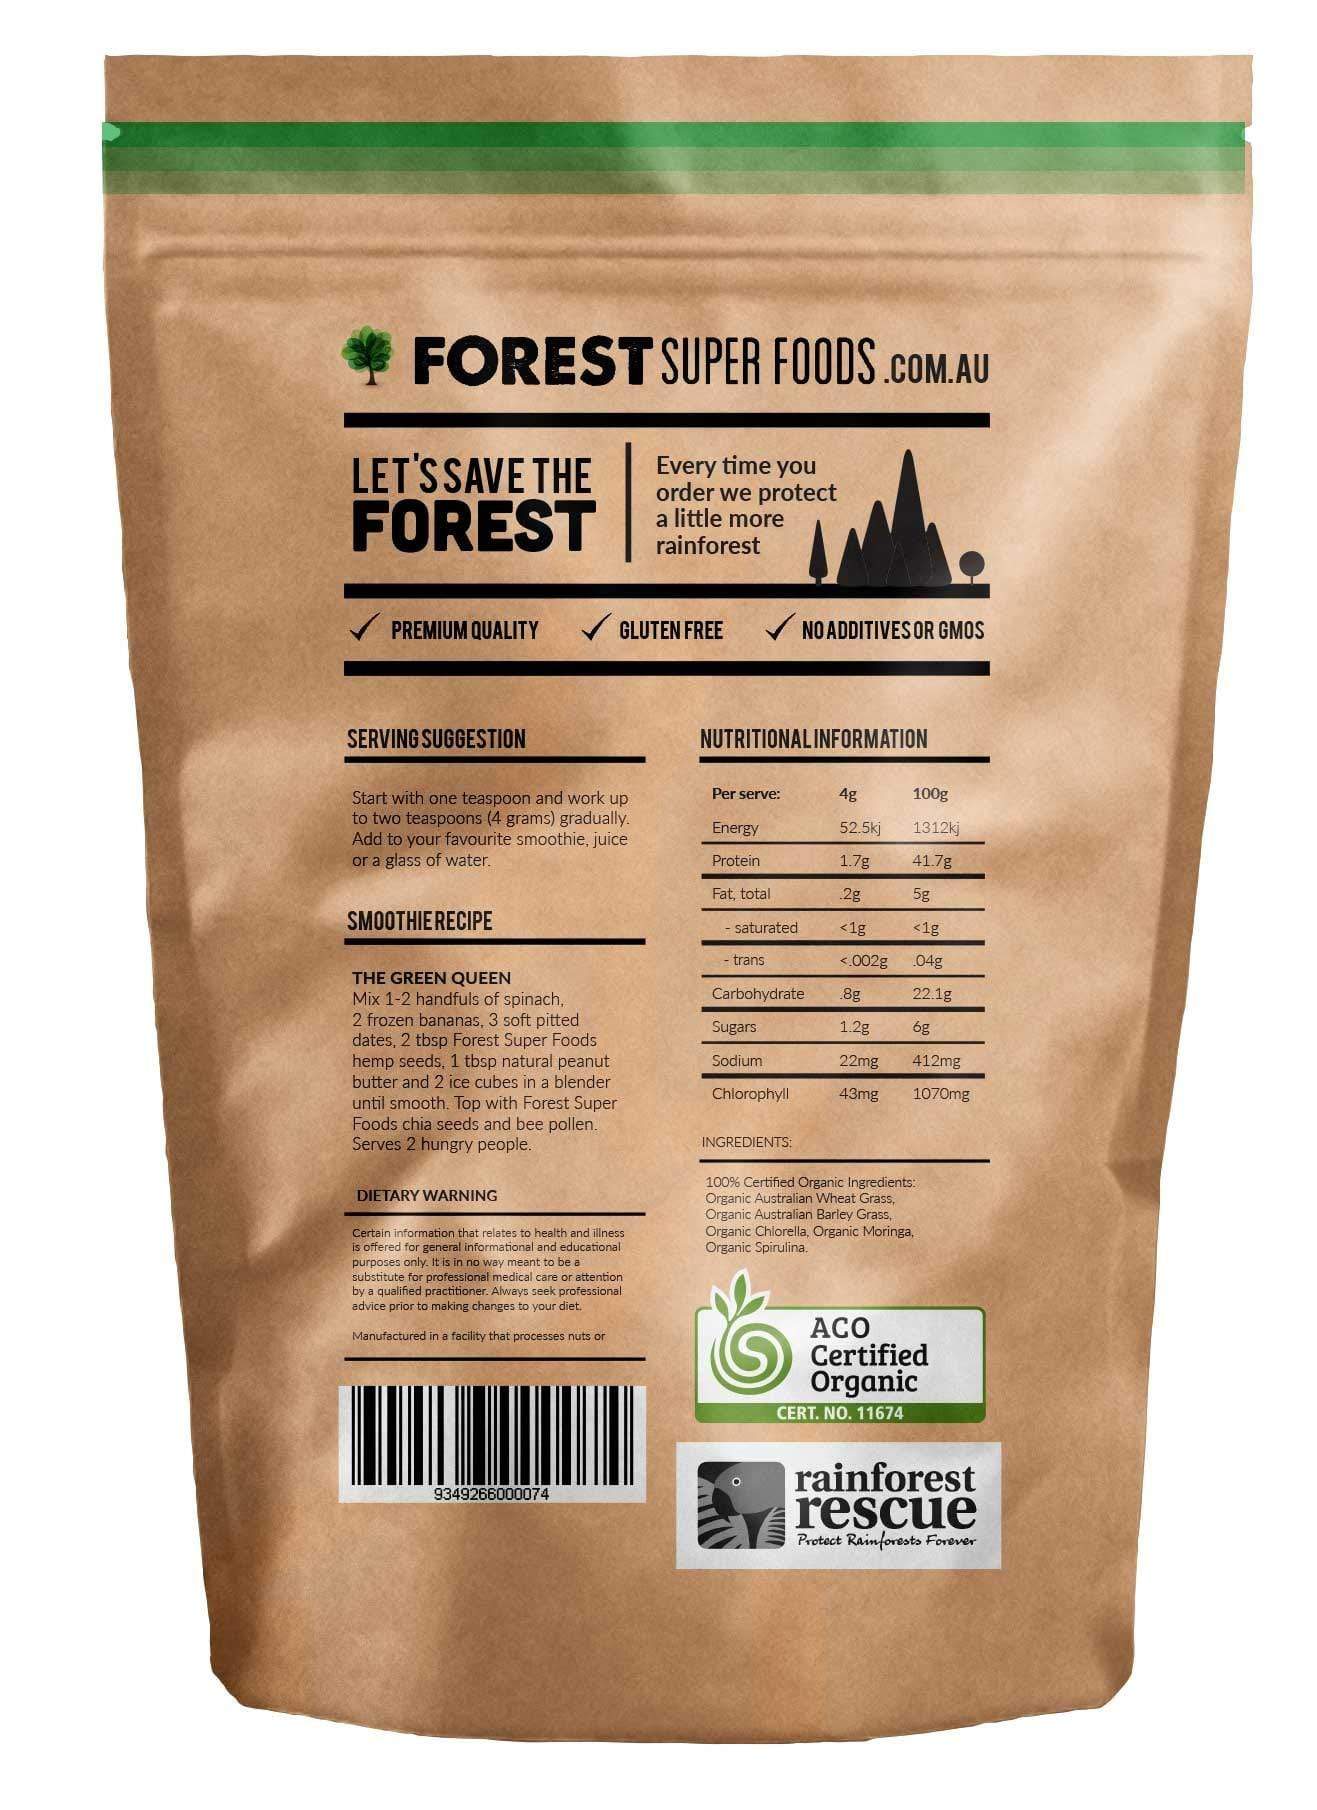 Forest Super Foods #1 Certified Organic Naked Greens 500g (60 day supply)-Curavita